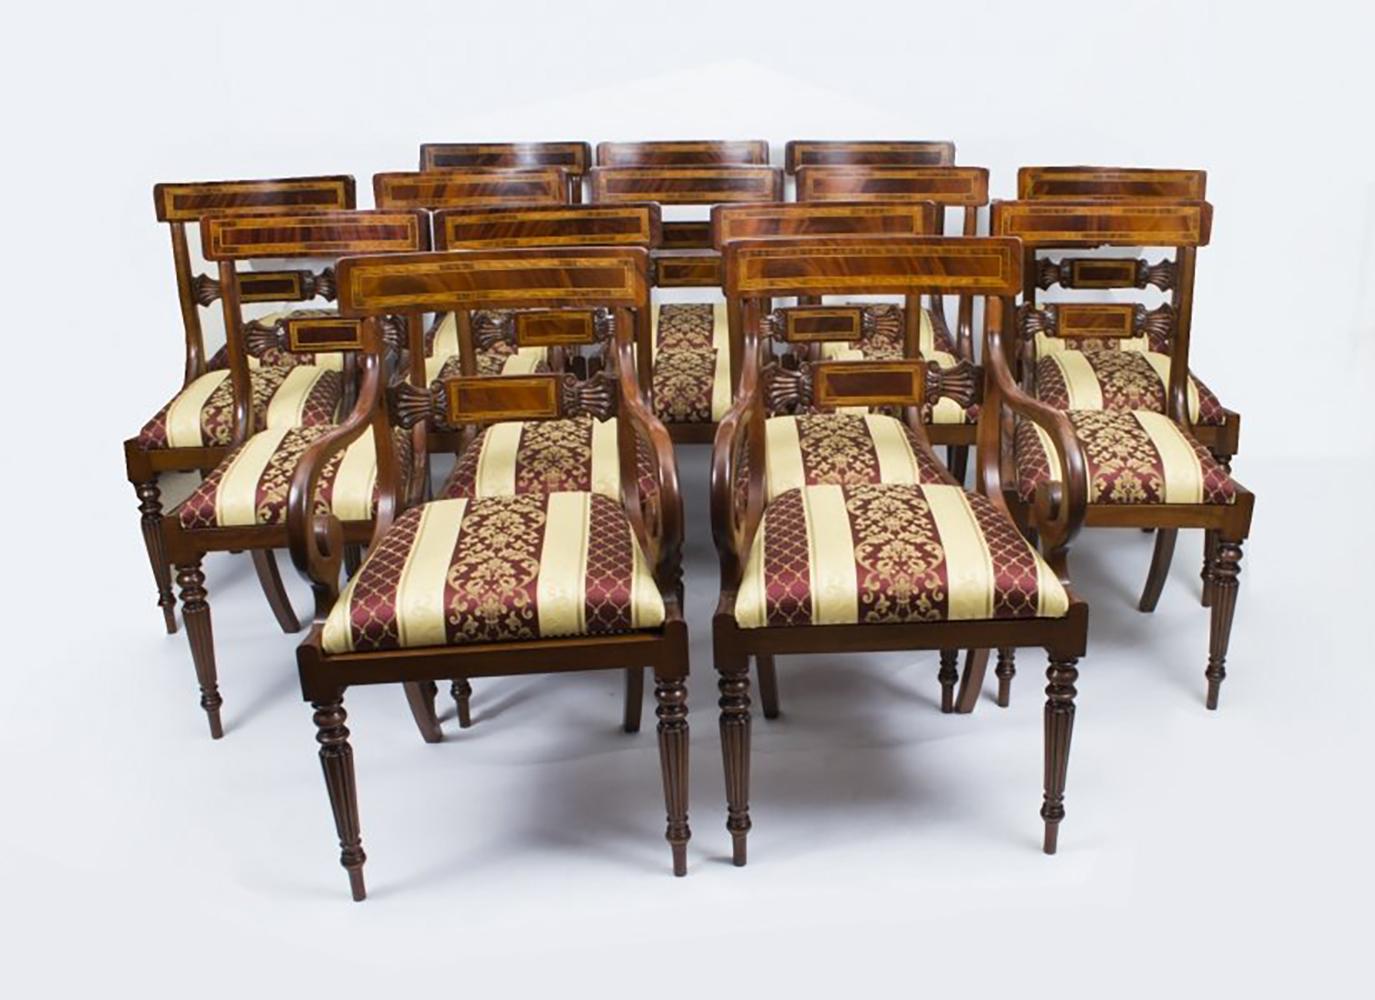 Vintage 14 ft Three Pillar Mahogany Dining Table and 16 Chairs 20th Century For Sale 15